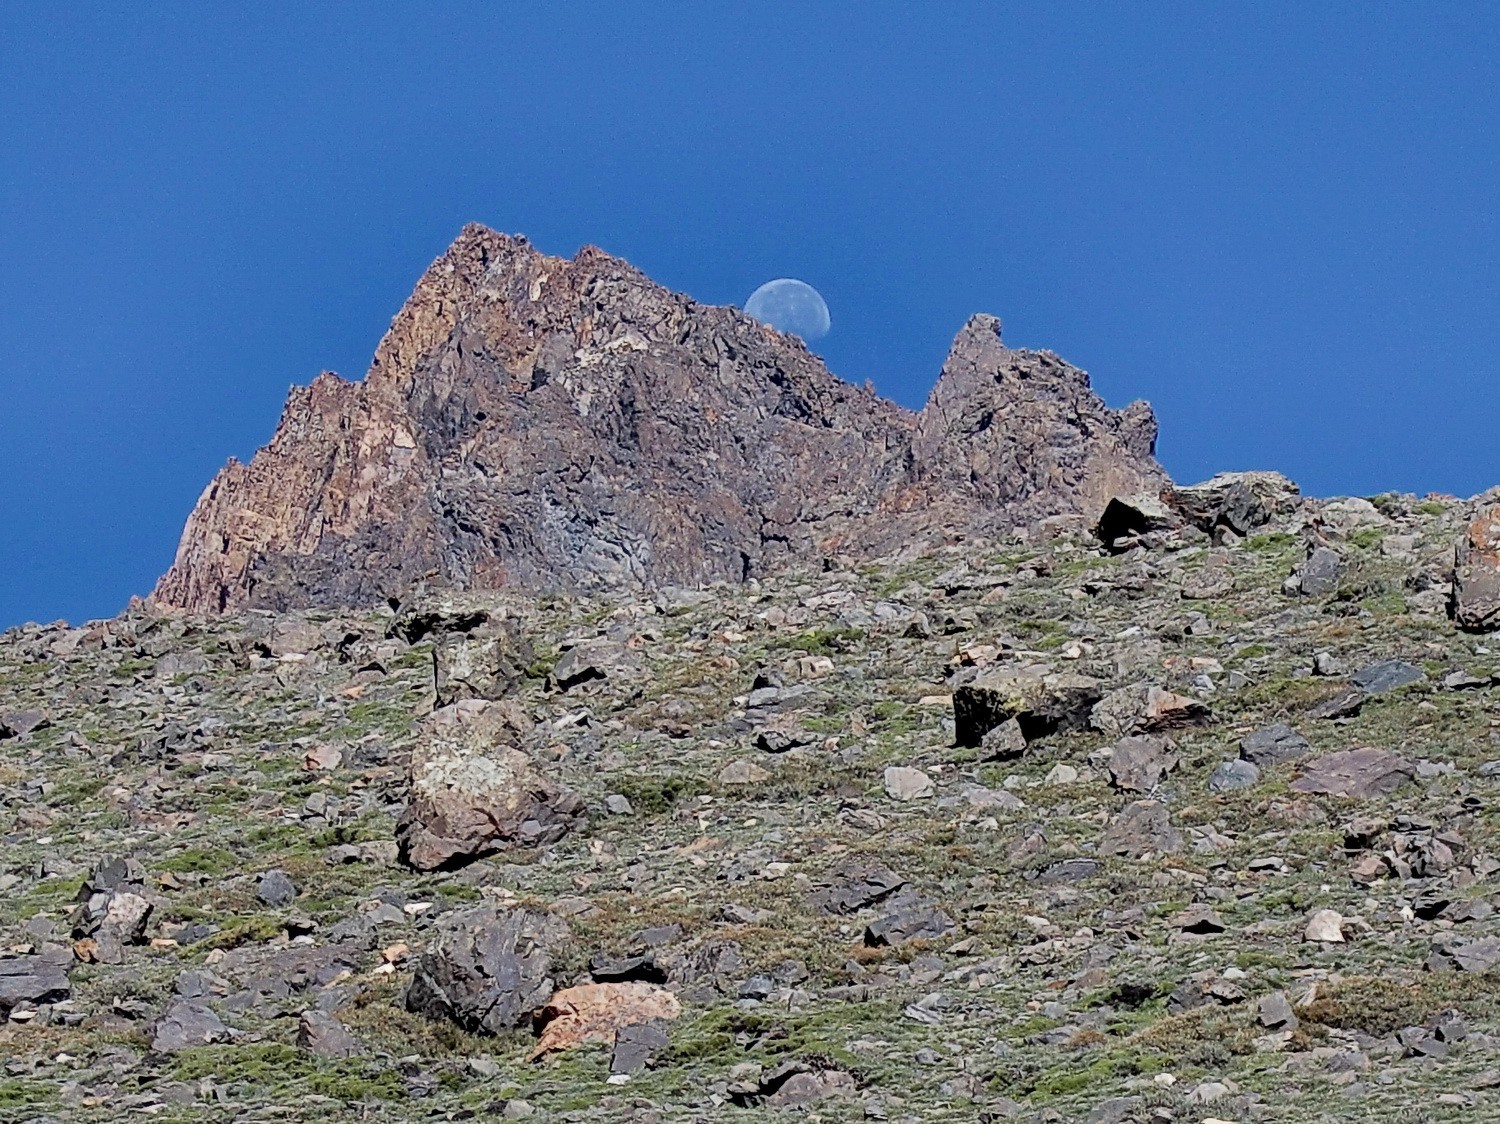 The moon in the gap of the top of Adofo Calle